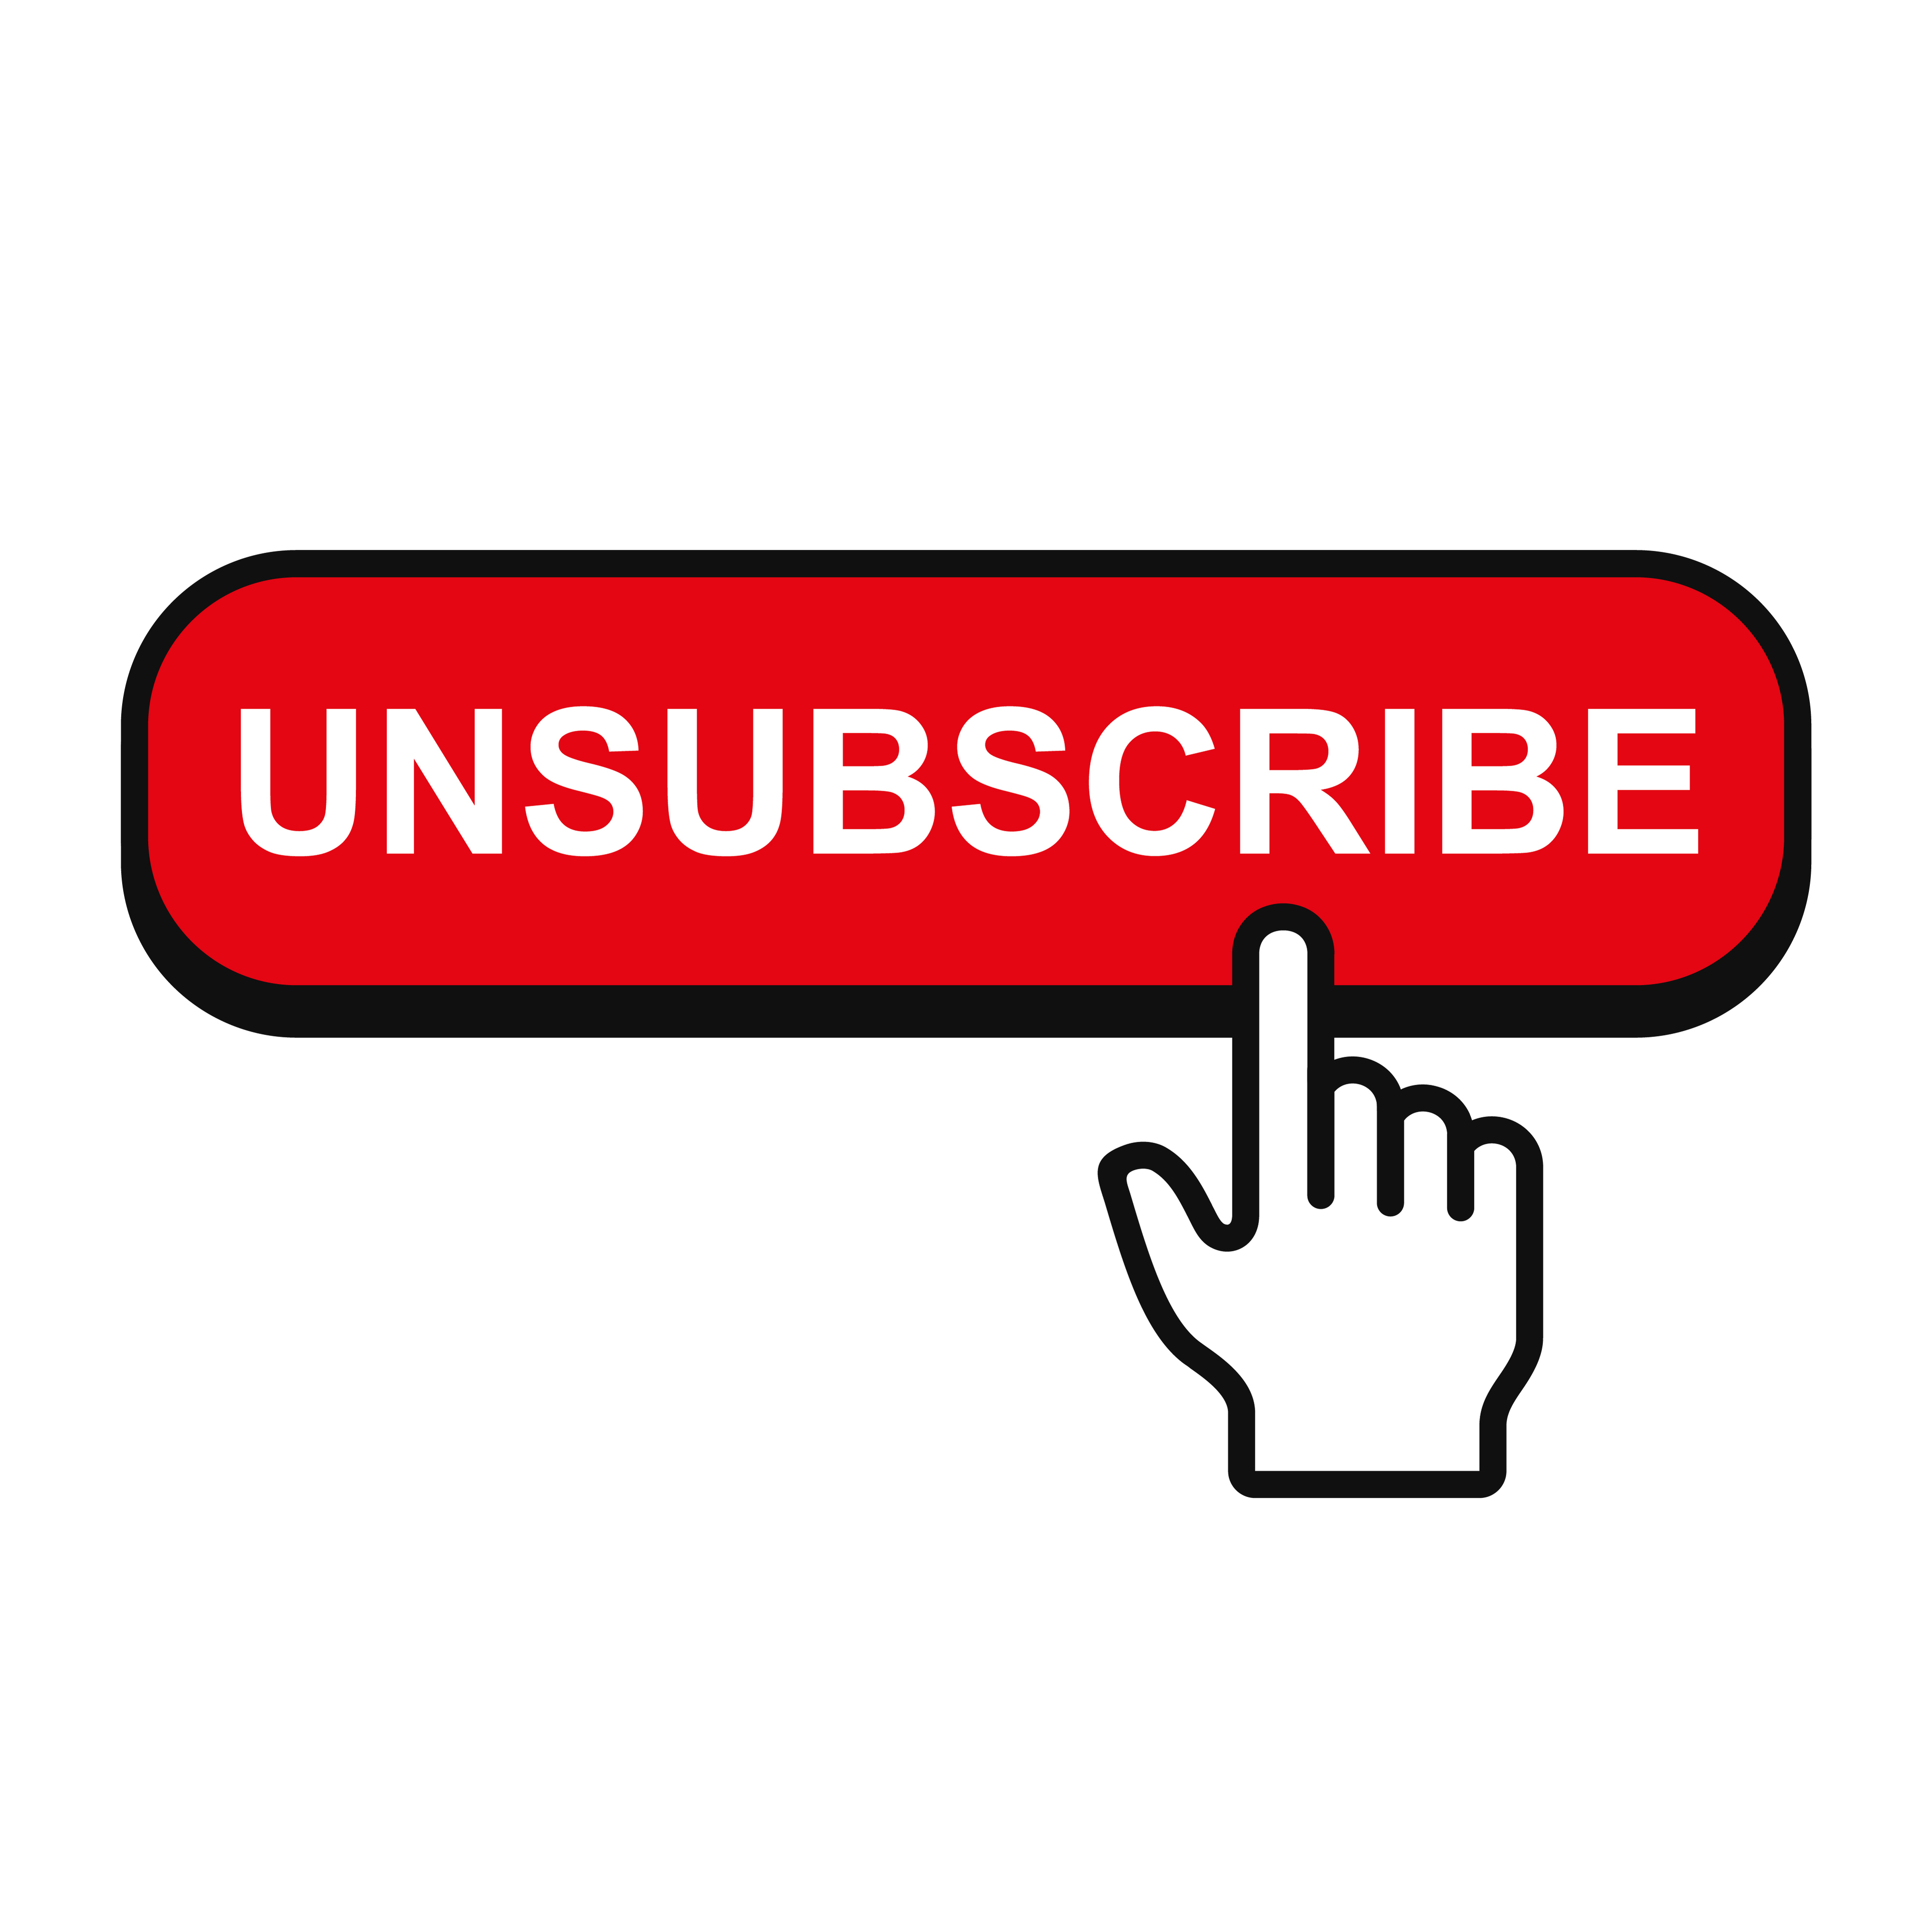 cursor hovering over unsubscribe button